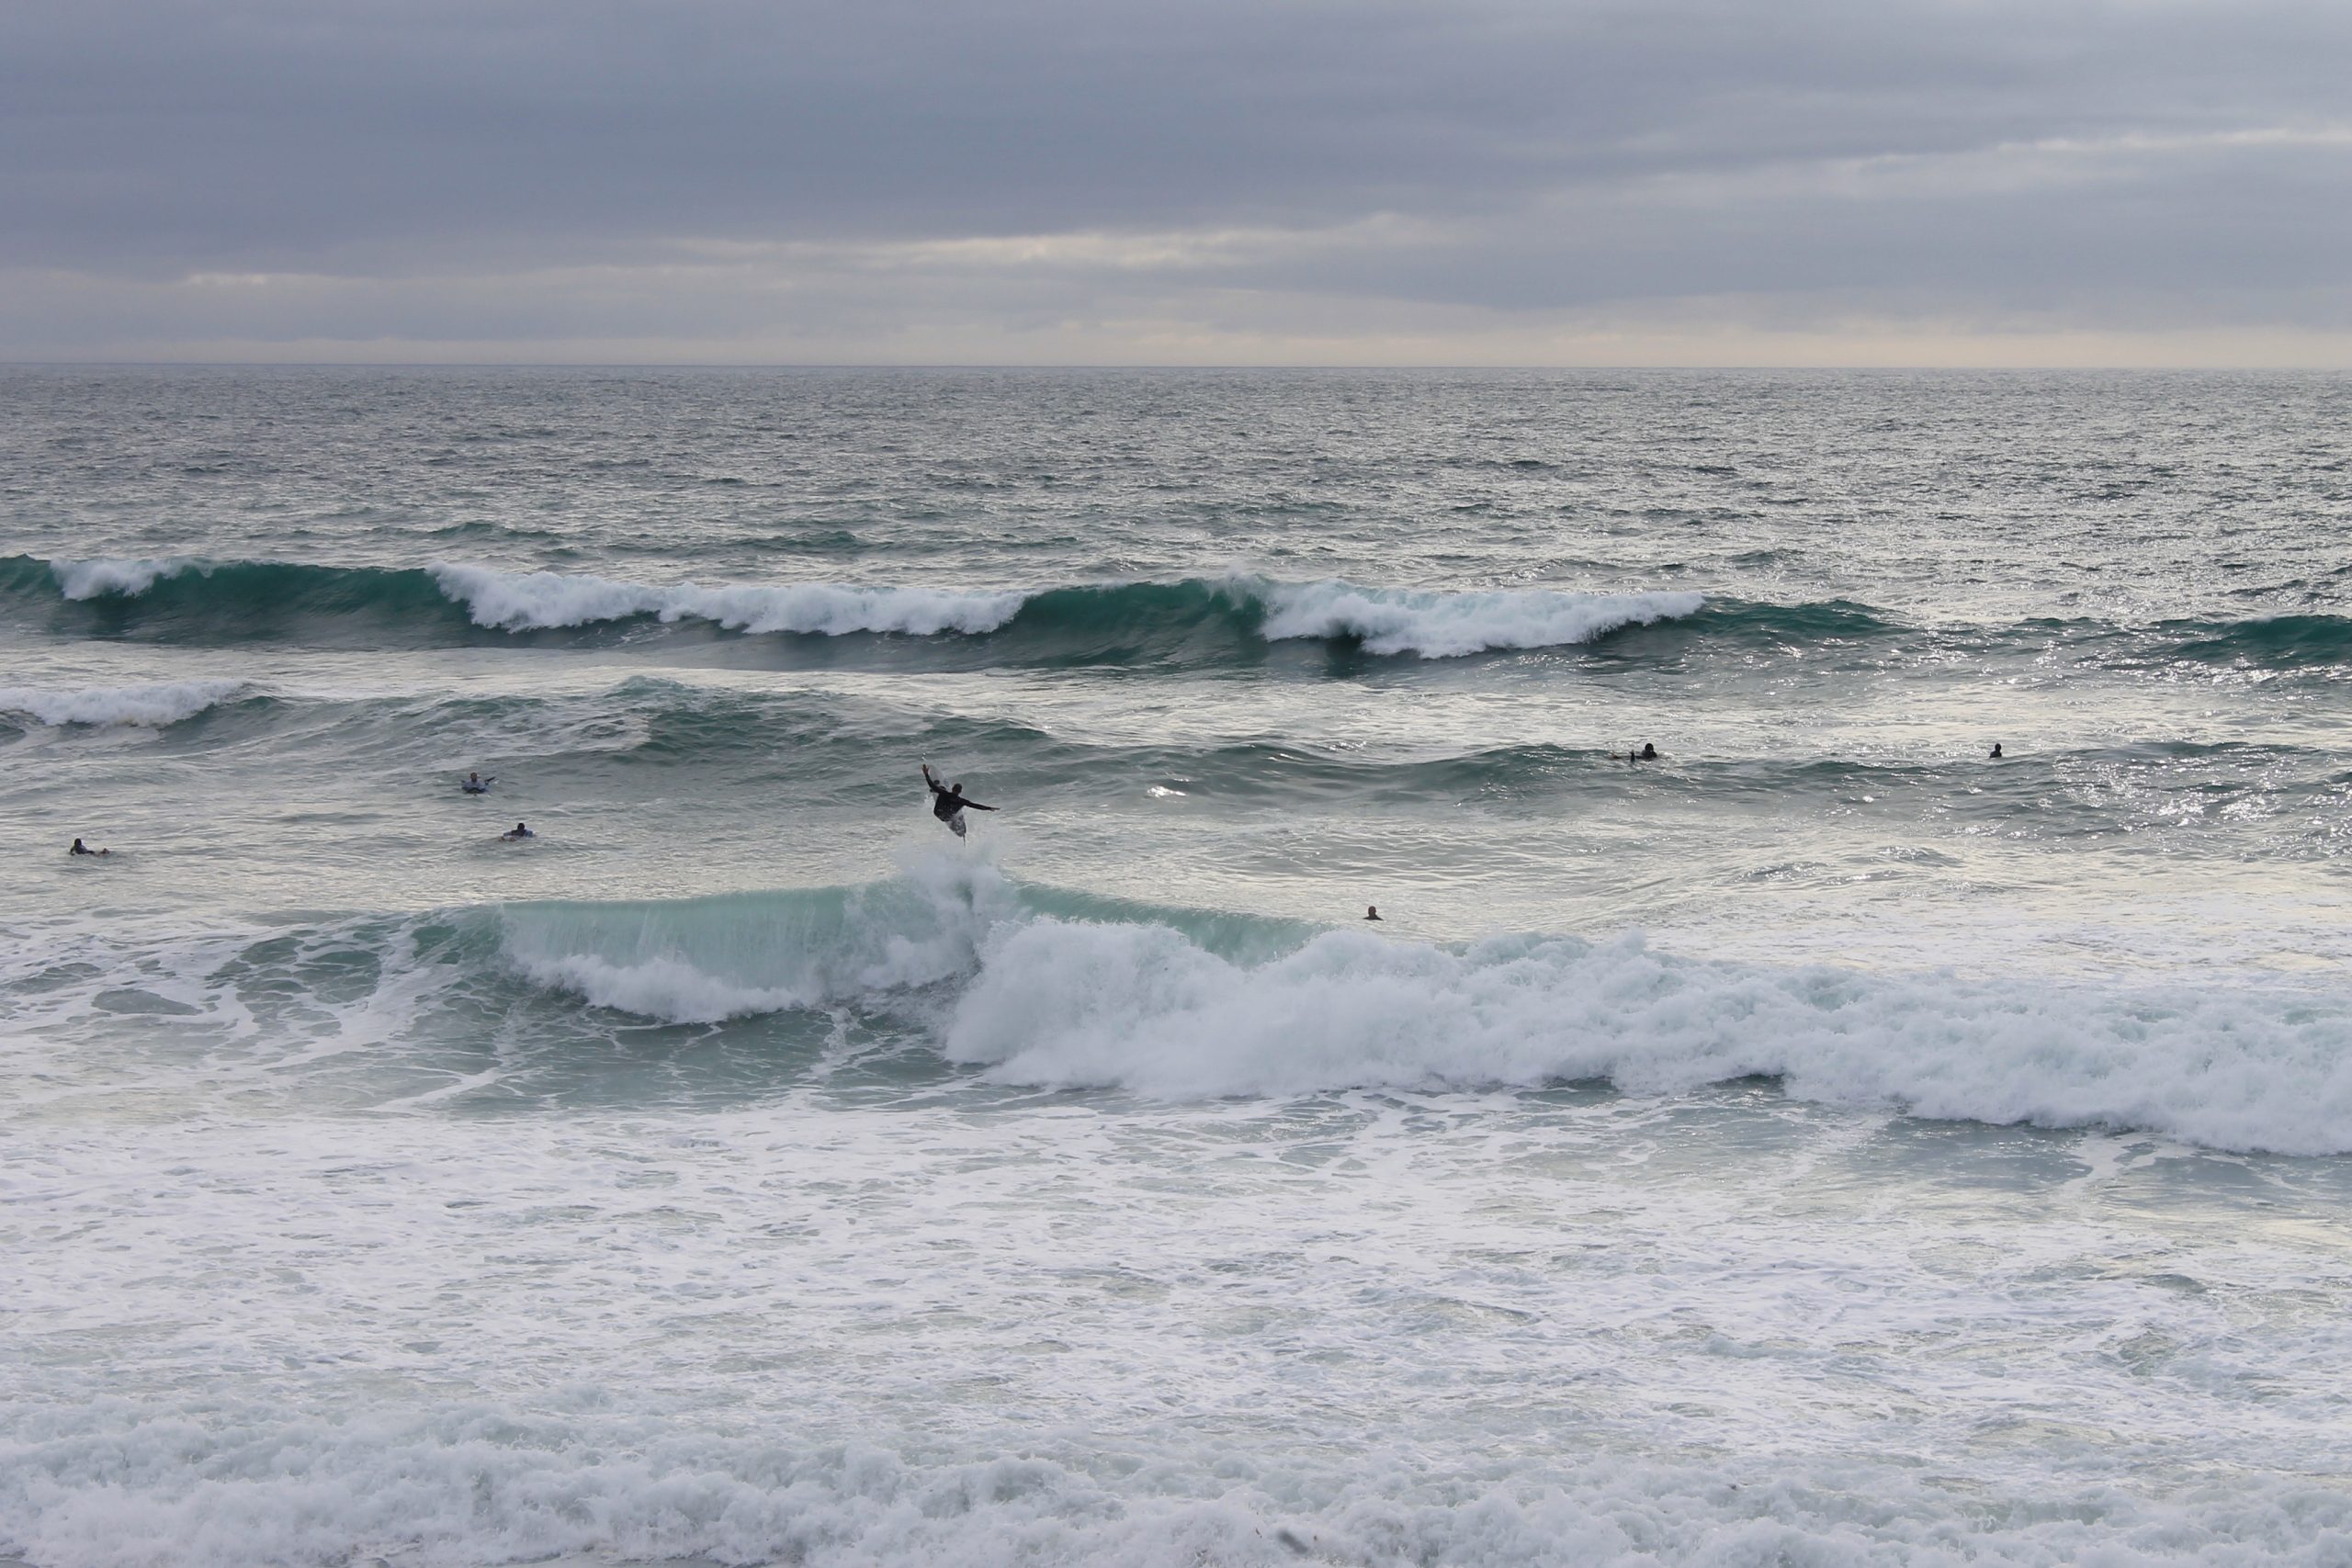 India Durban – Taken at Porthtowan on a very stormy day in spring